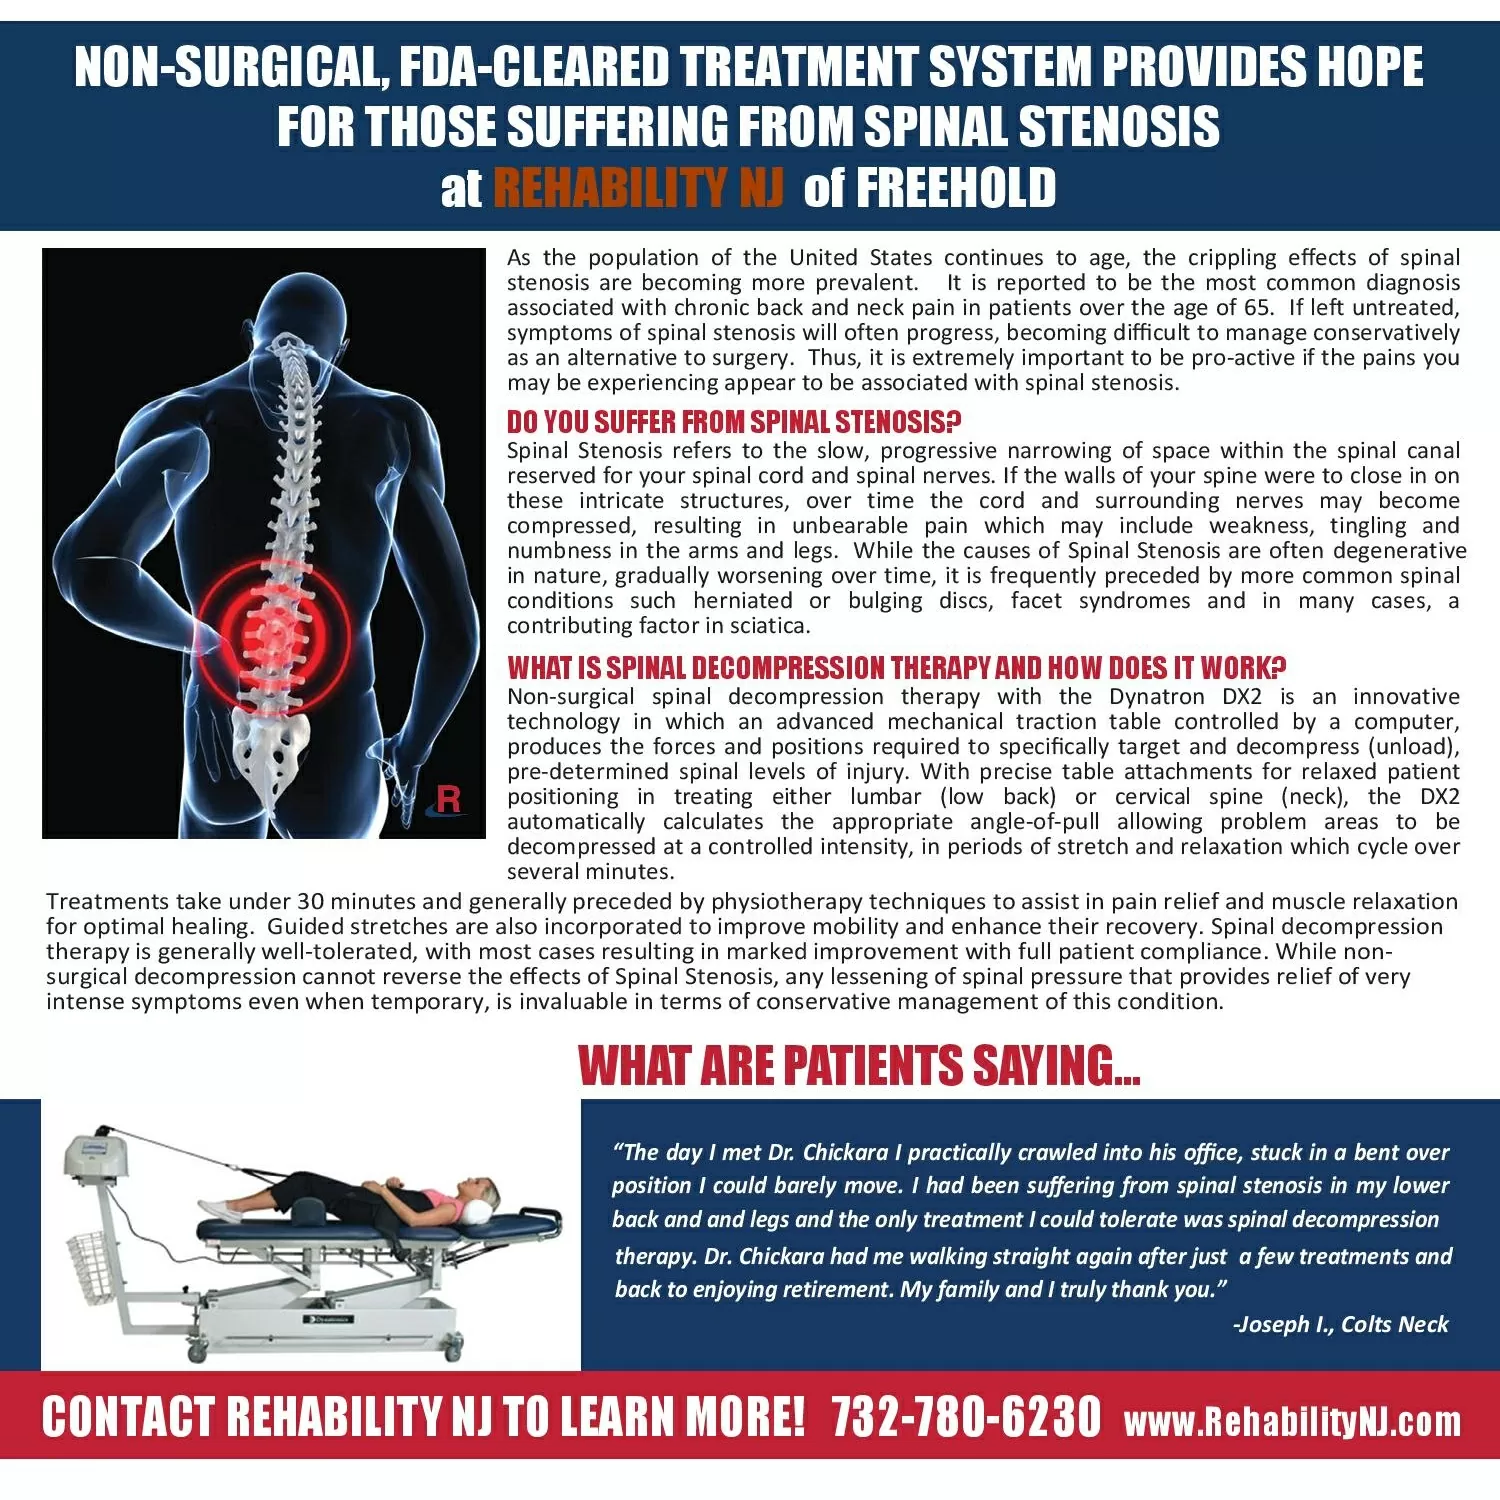 Spinal-Decompression-Therapy-And-How-Does-It-Work-Rehability-Freehold-NJ.jpg